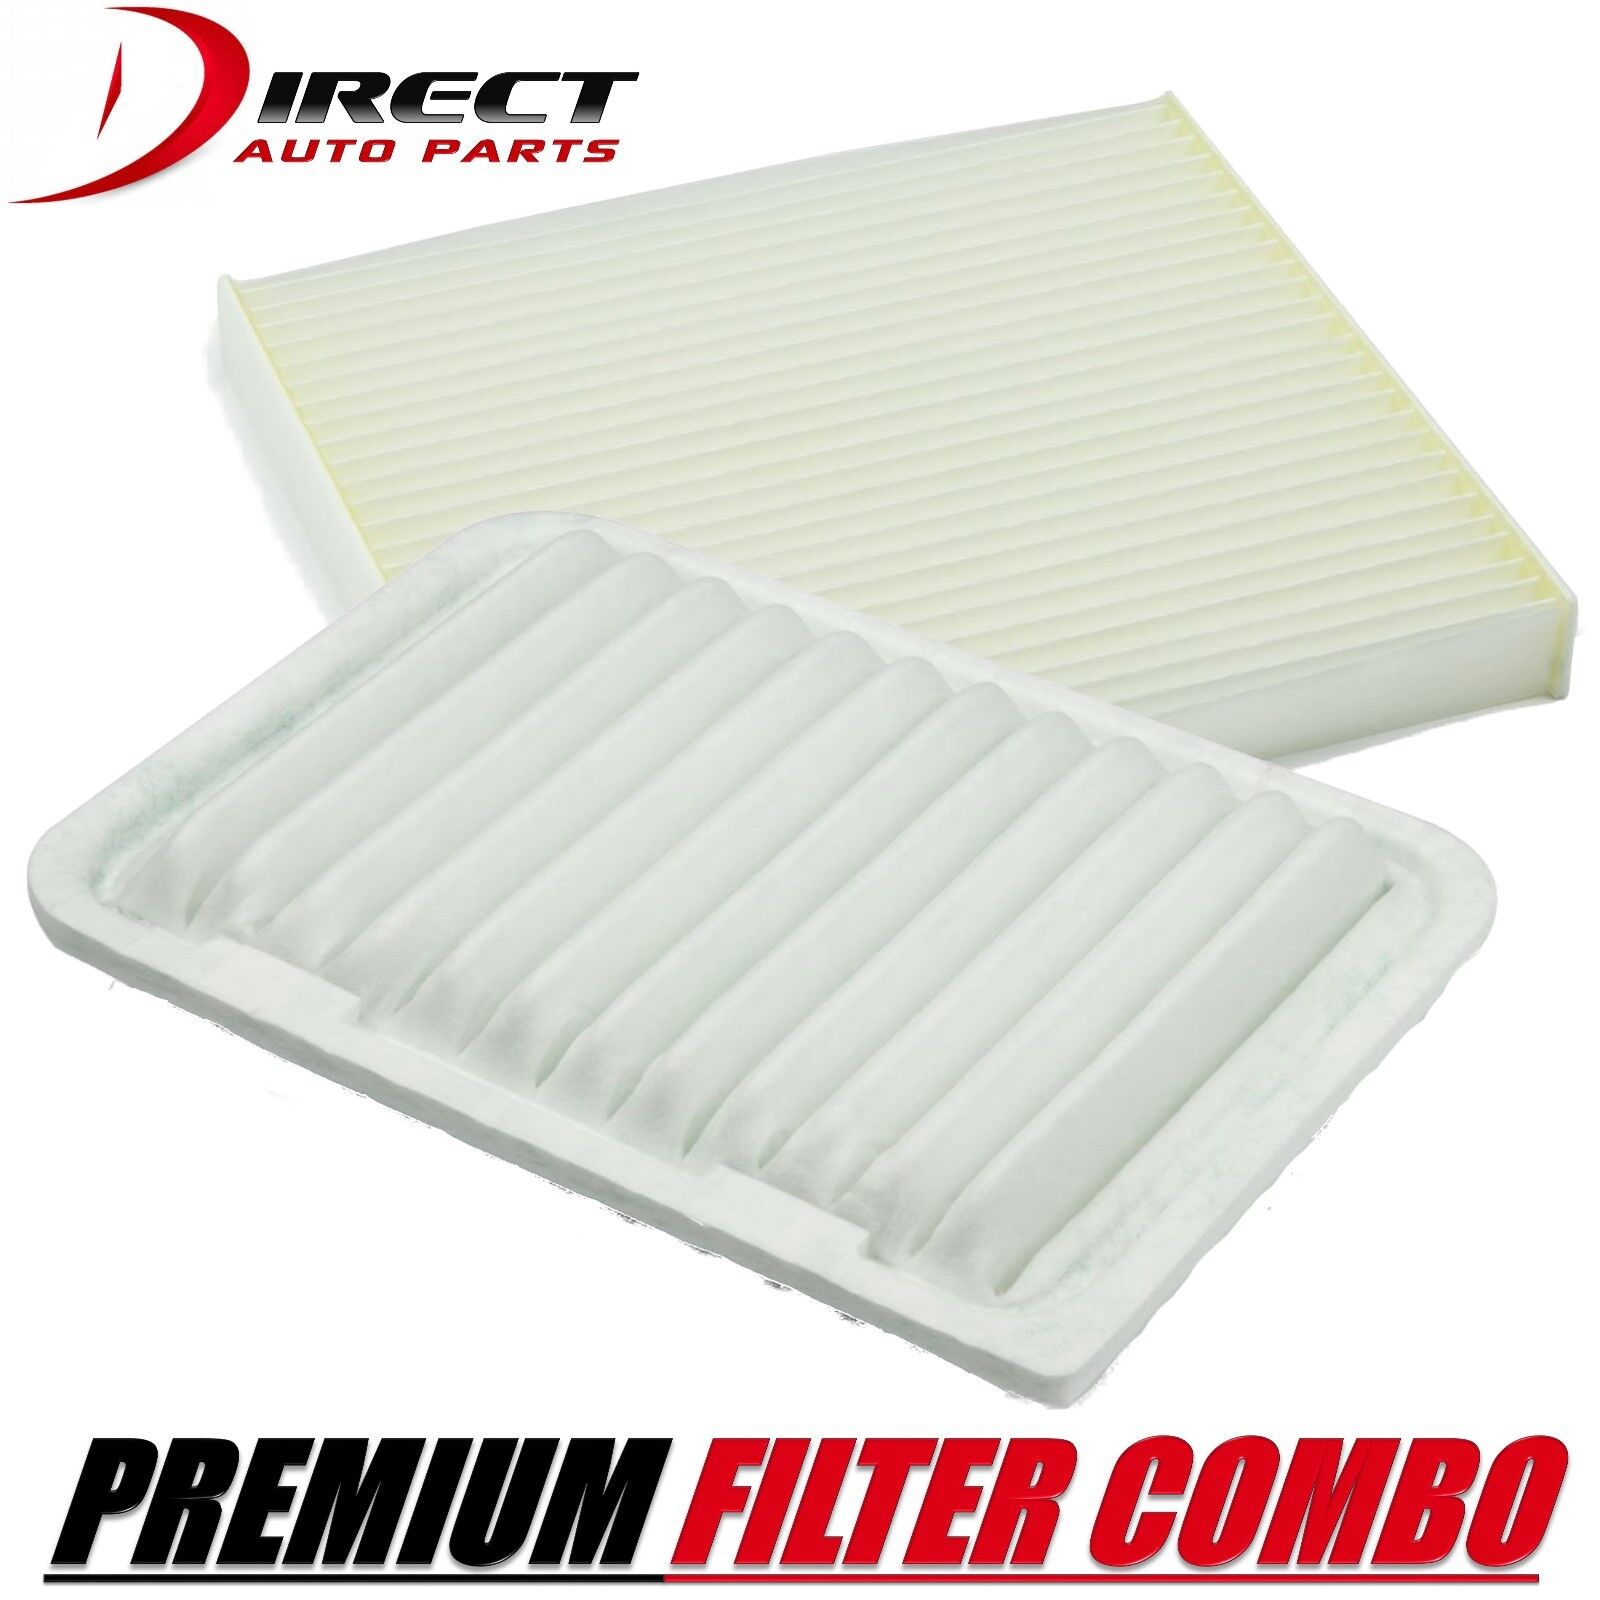 TOYOTA CABIN &  AIR FILTER COMBO FOR TOYOTA CAMRY HYBRID 2.4L ENGINE 2007 - 2010